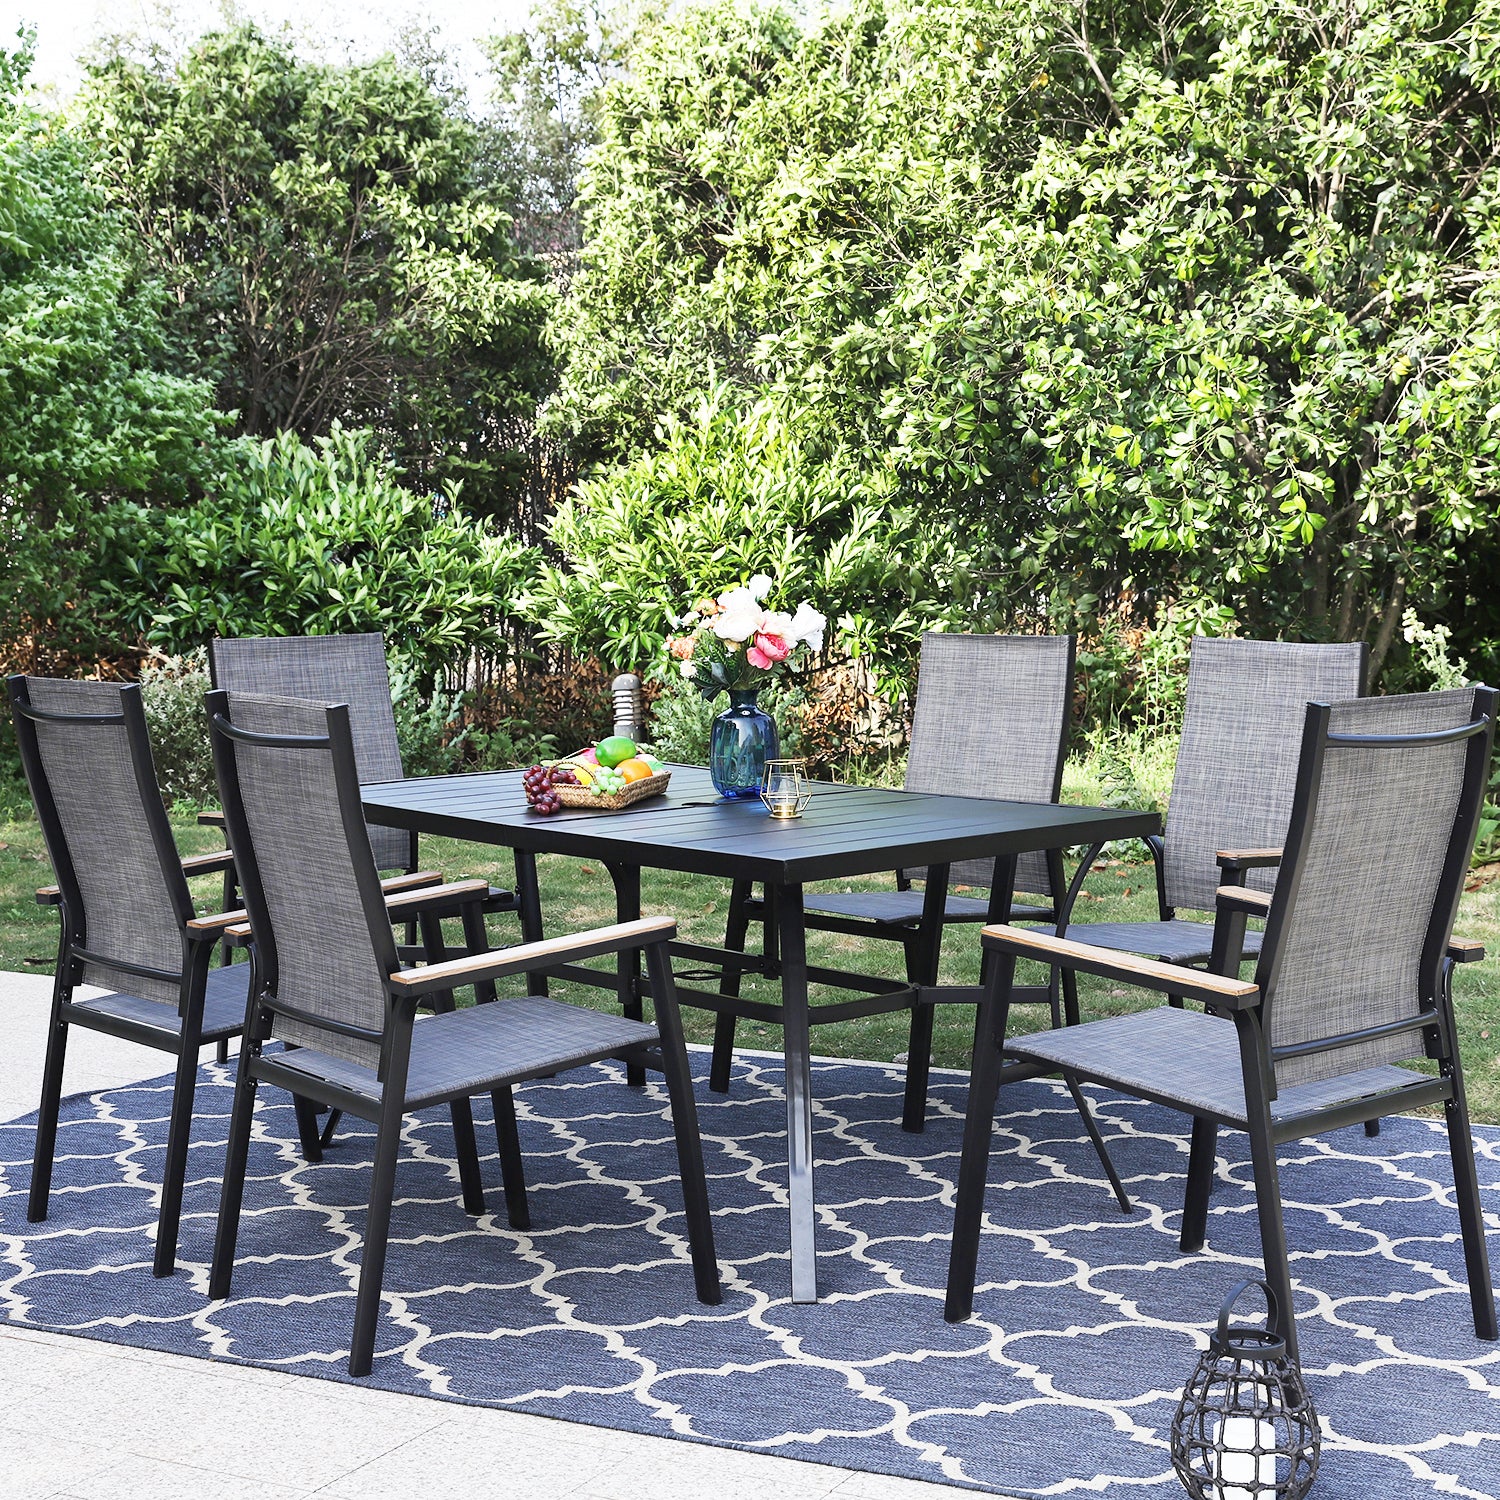 PHI VILLA 7-Piece Steel Panel Table & Textilene Dining Chairs Patio Outdoor Dining Set